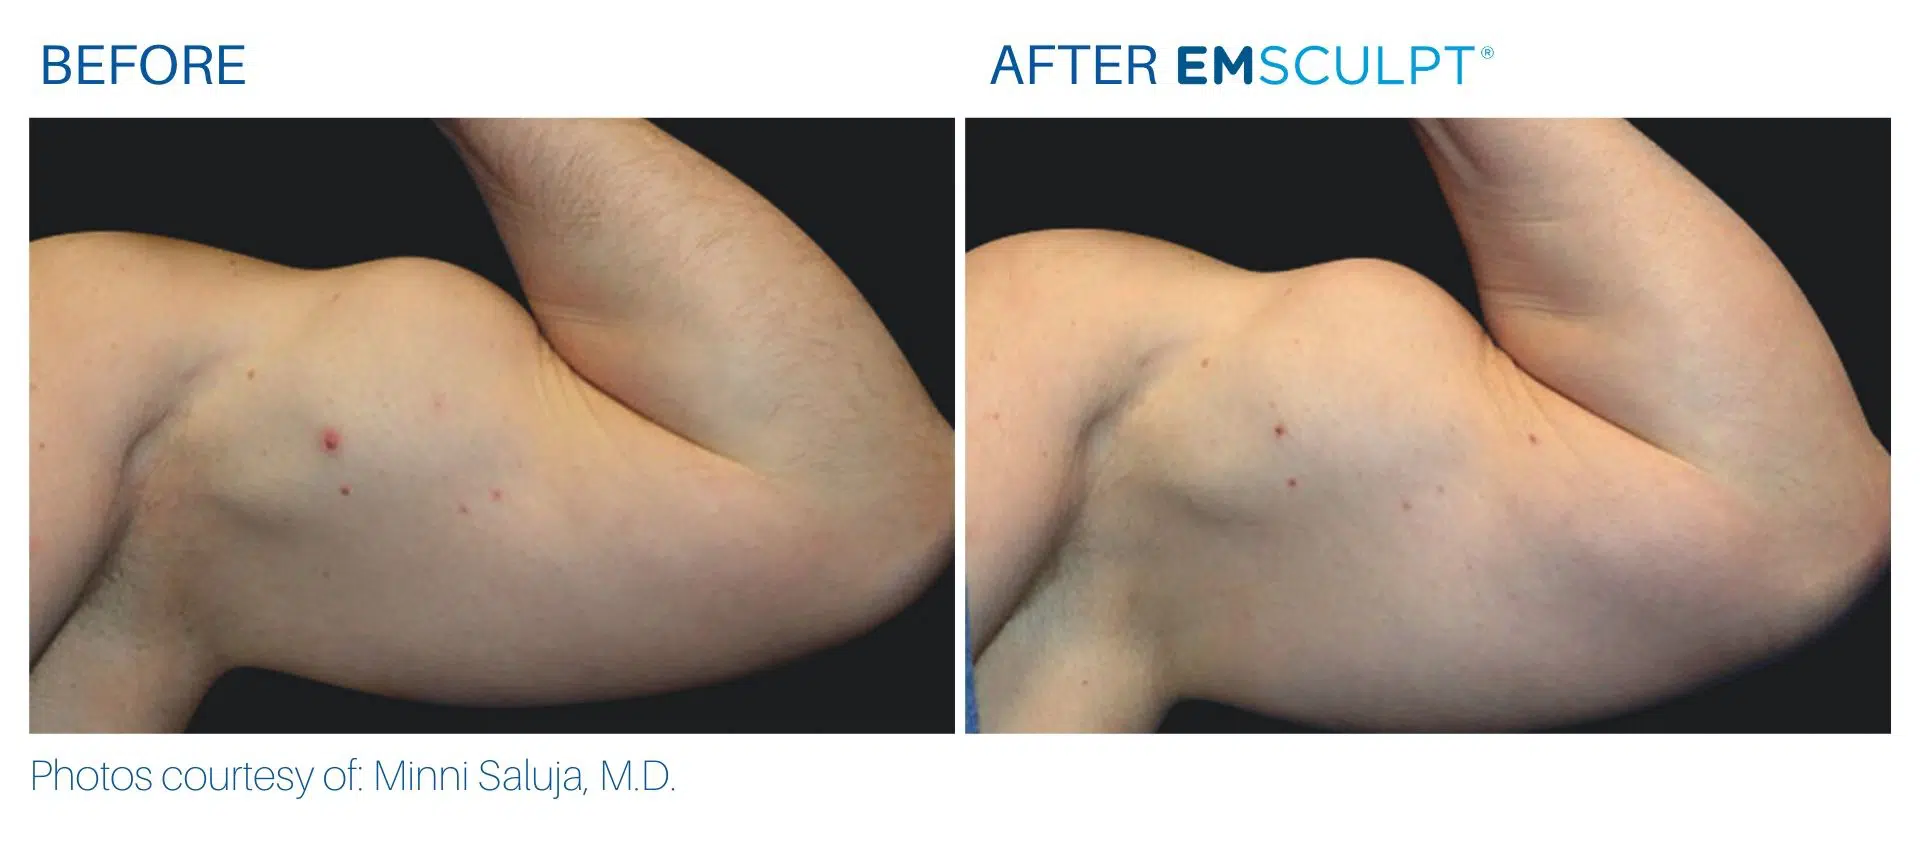 Emsculpt provider in the Yonkers Body Morph MD